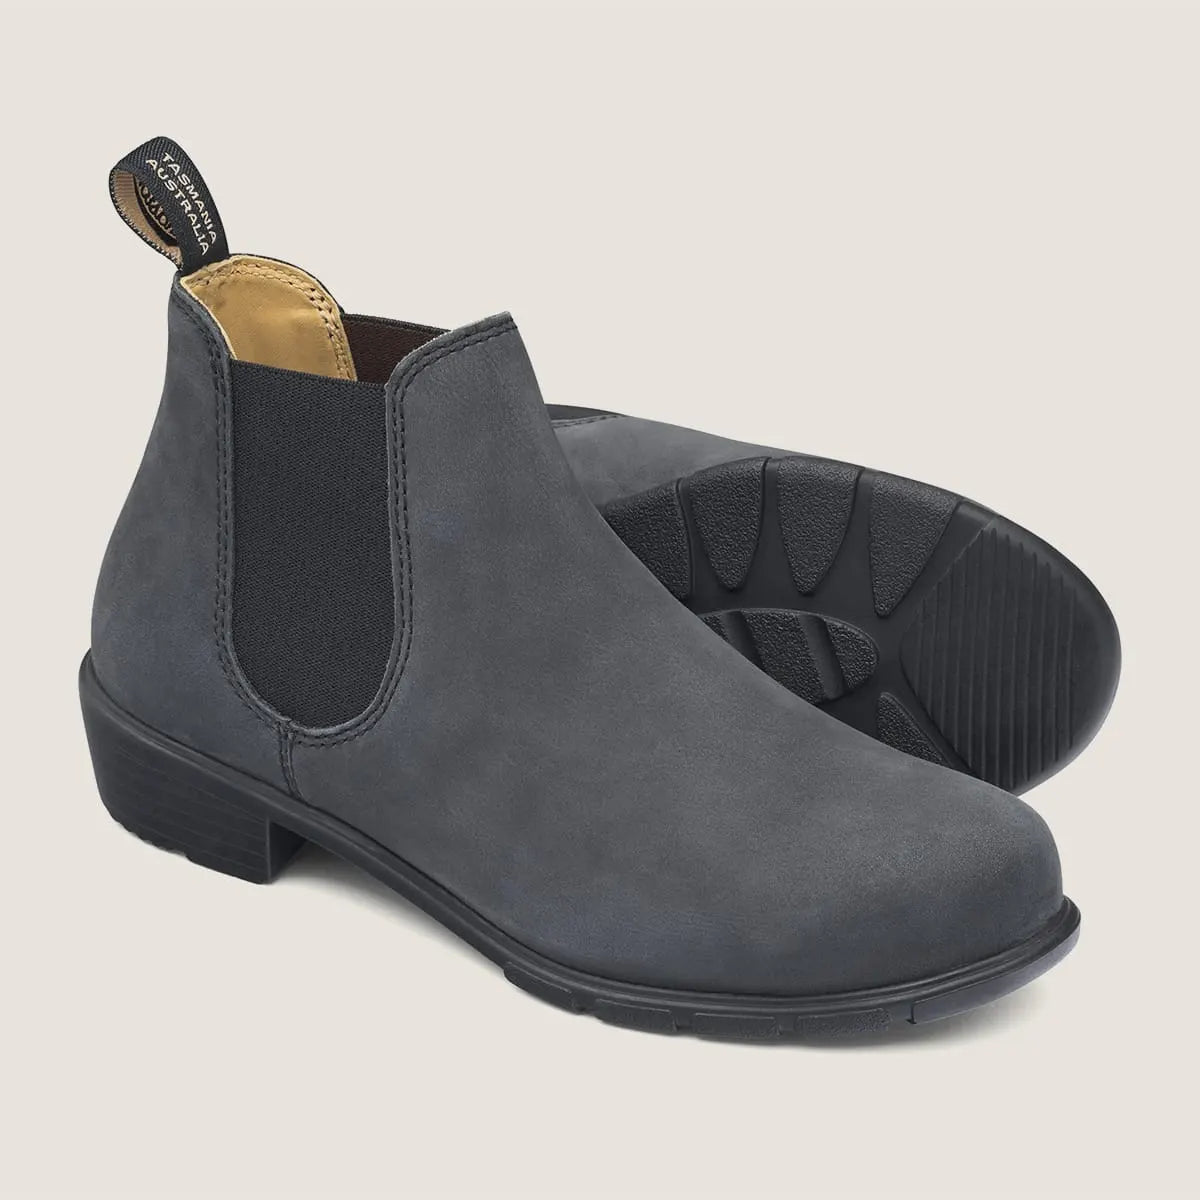 Blundstone 1971 Womens Ankle Boots